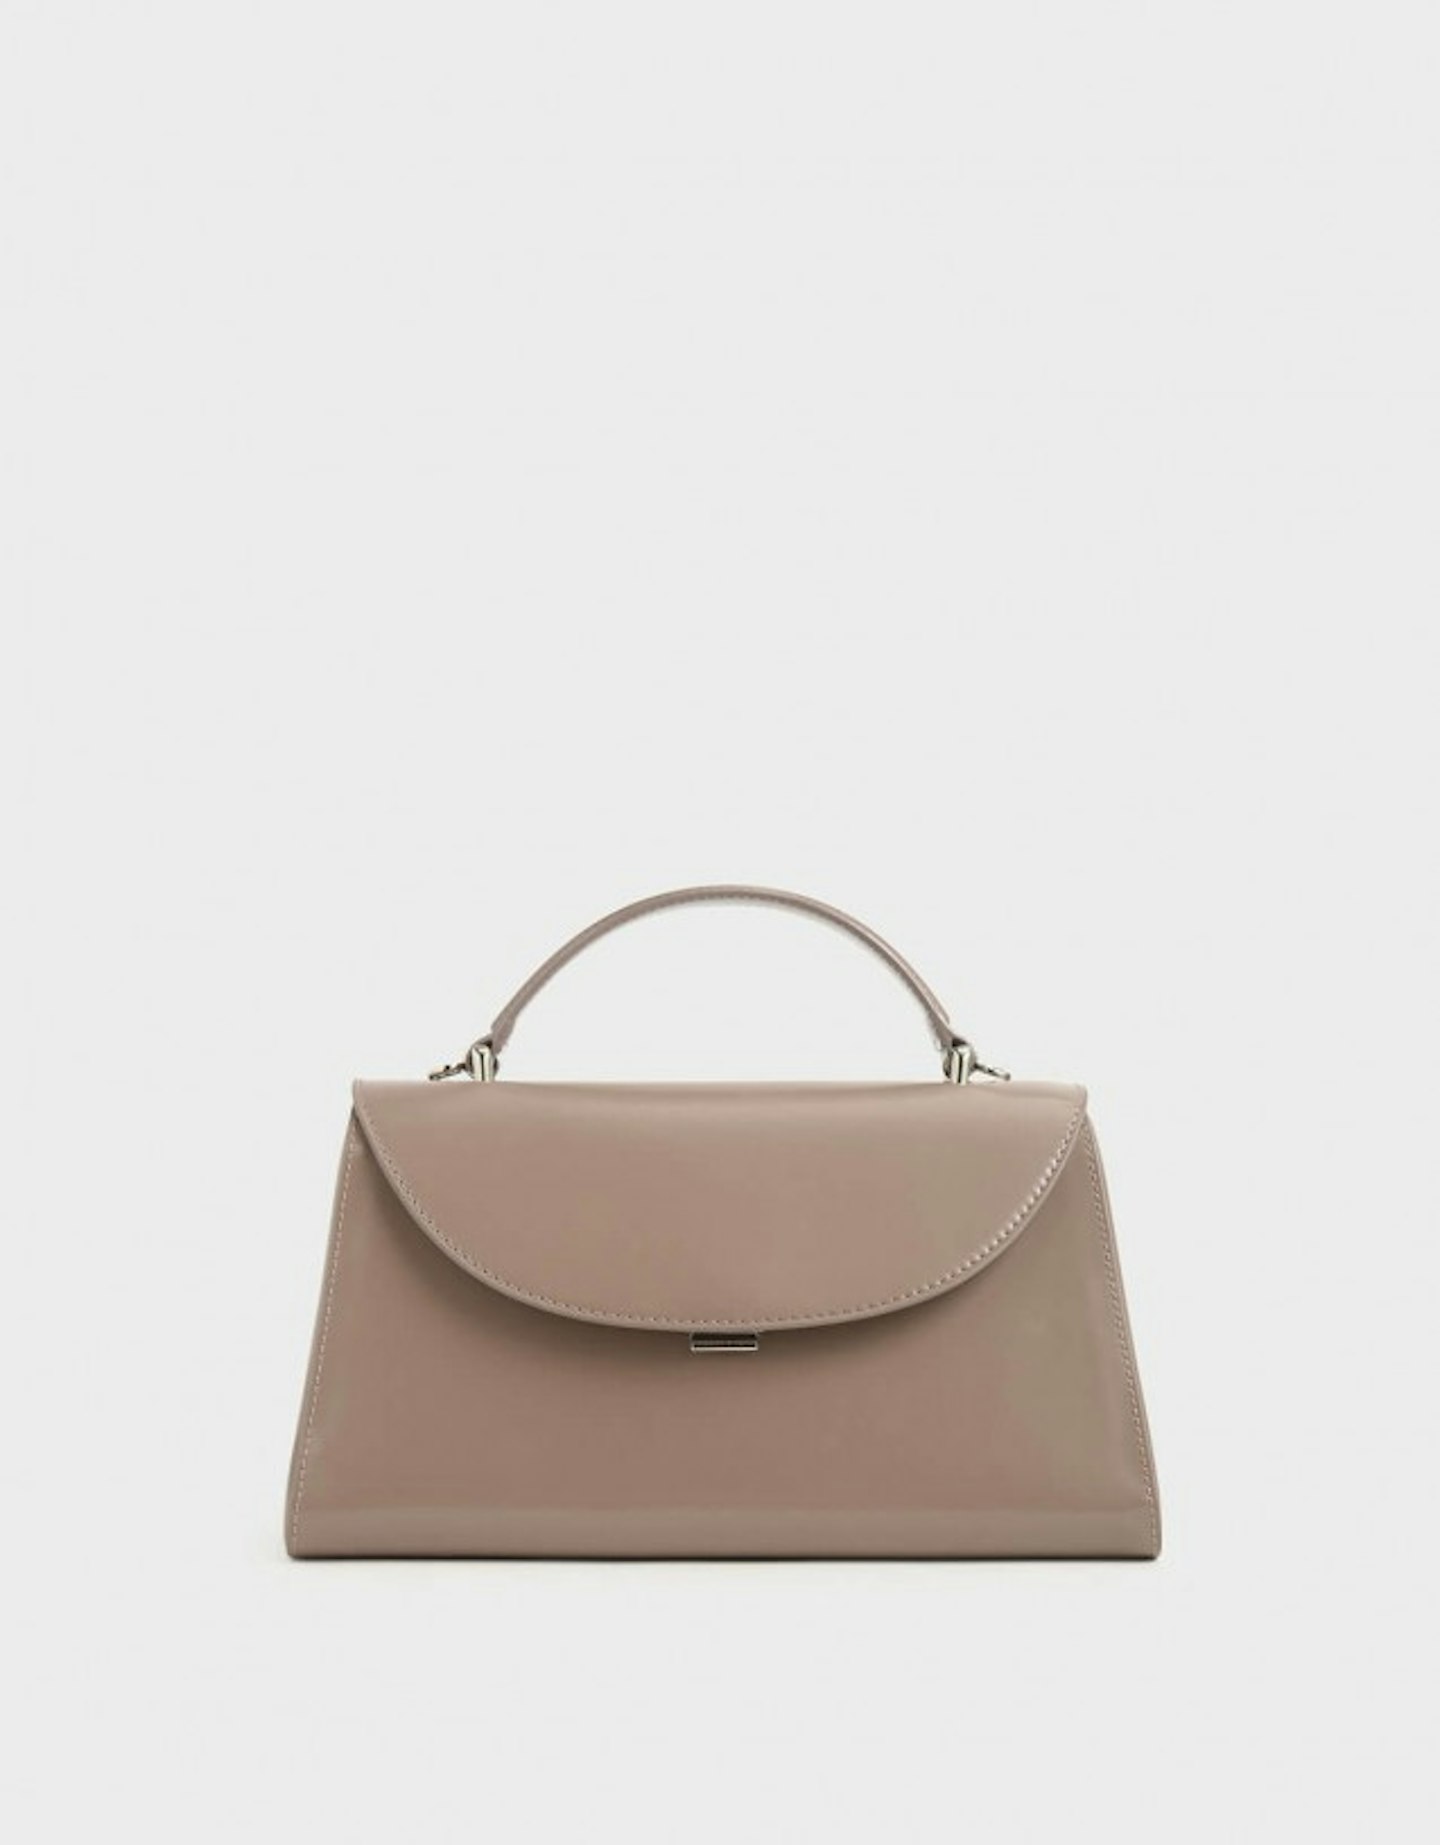 Charles & Keith, Structured Top Handle Bag, £49